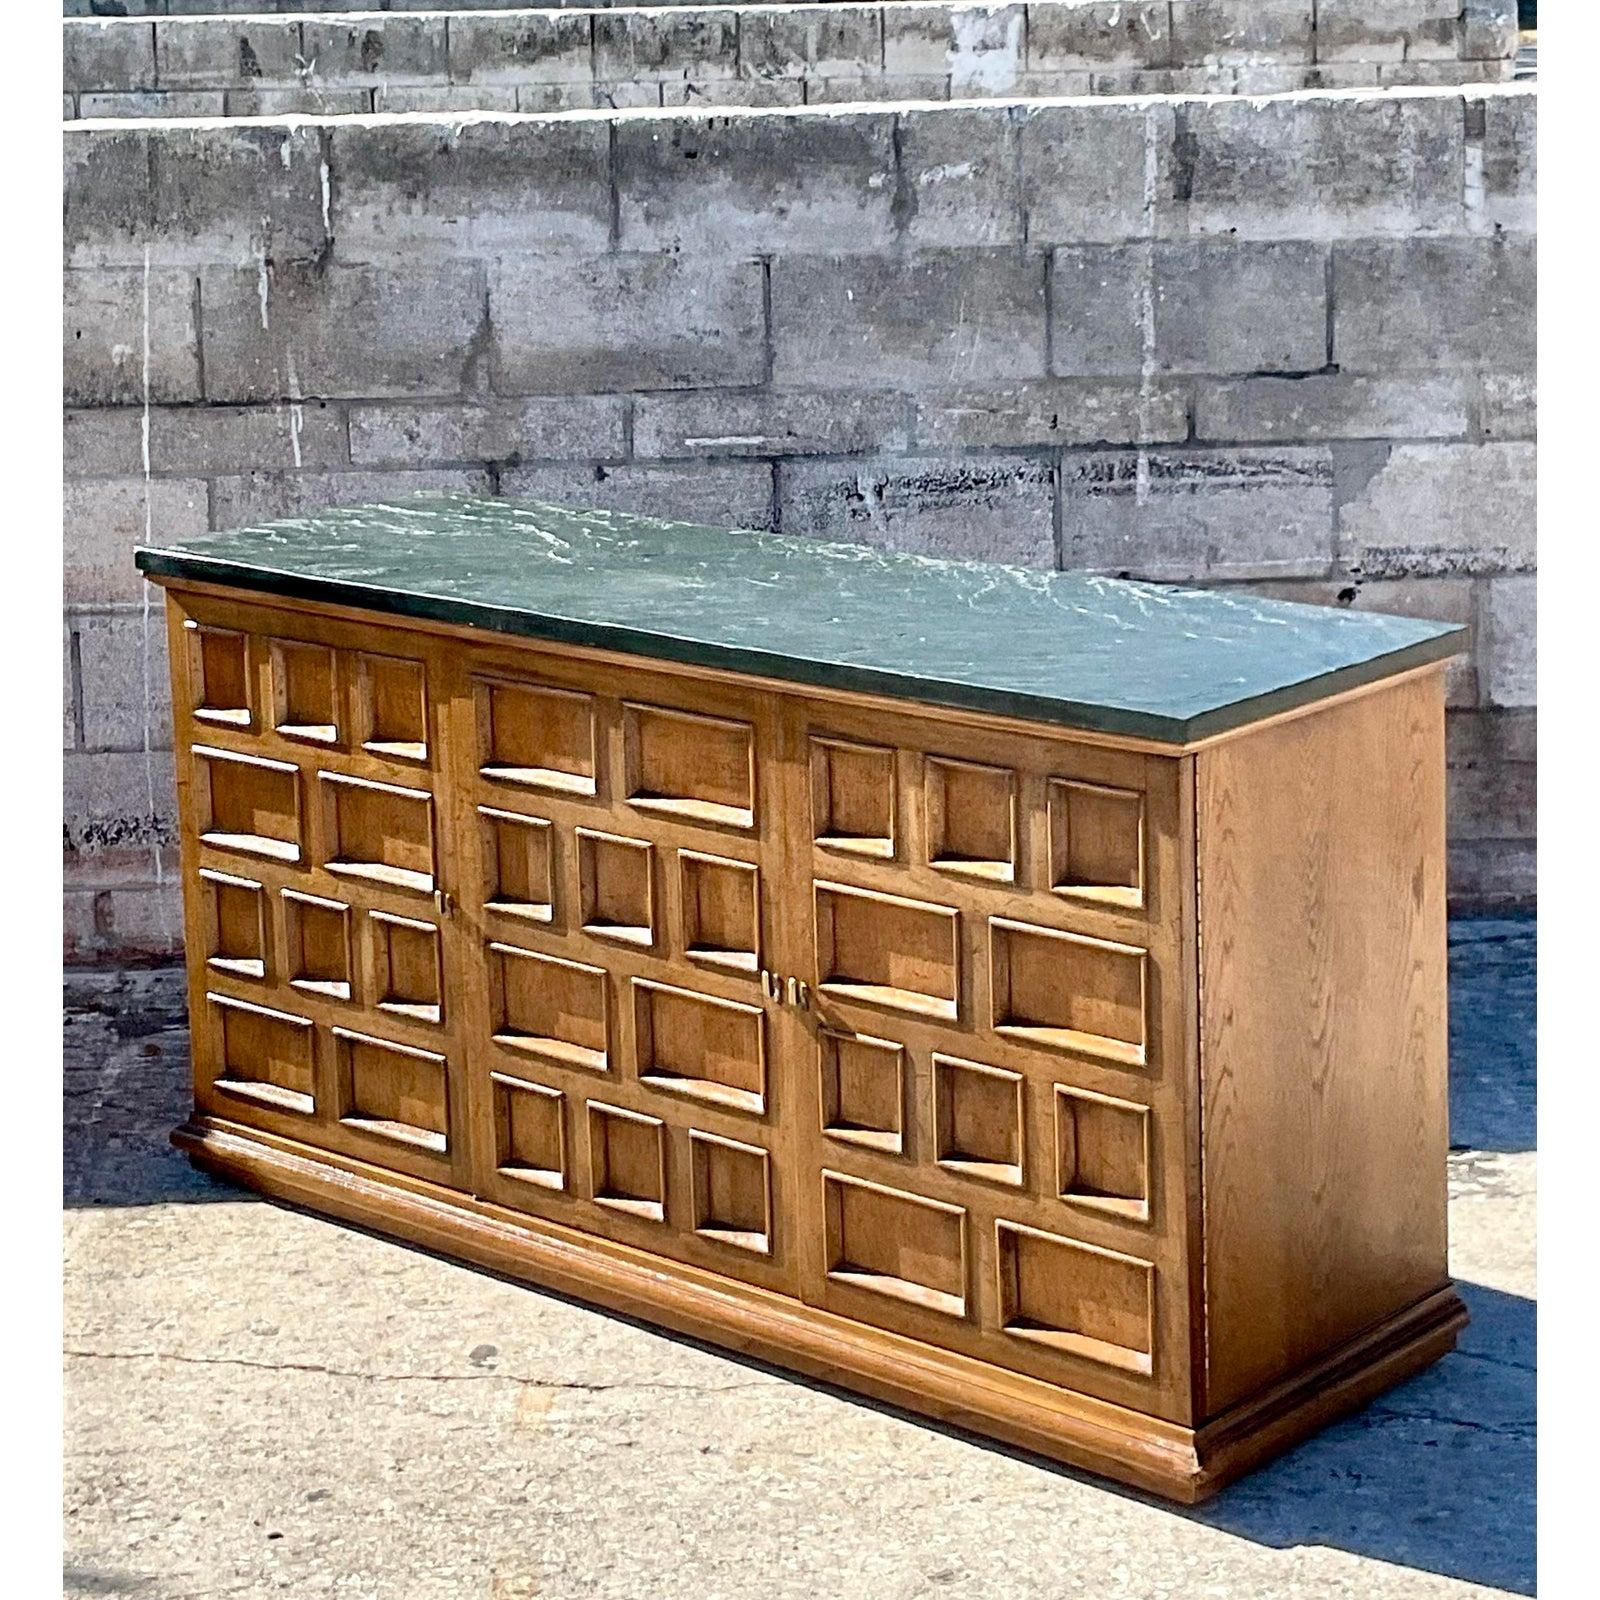 Fantastic vintage MCM Henredon credenza. A chic block Millwork design with a thick slate top. Super stylish. Three additional drawers for storage and an open area for shelving. Acquired from a Palm Beach estate.